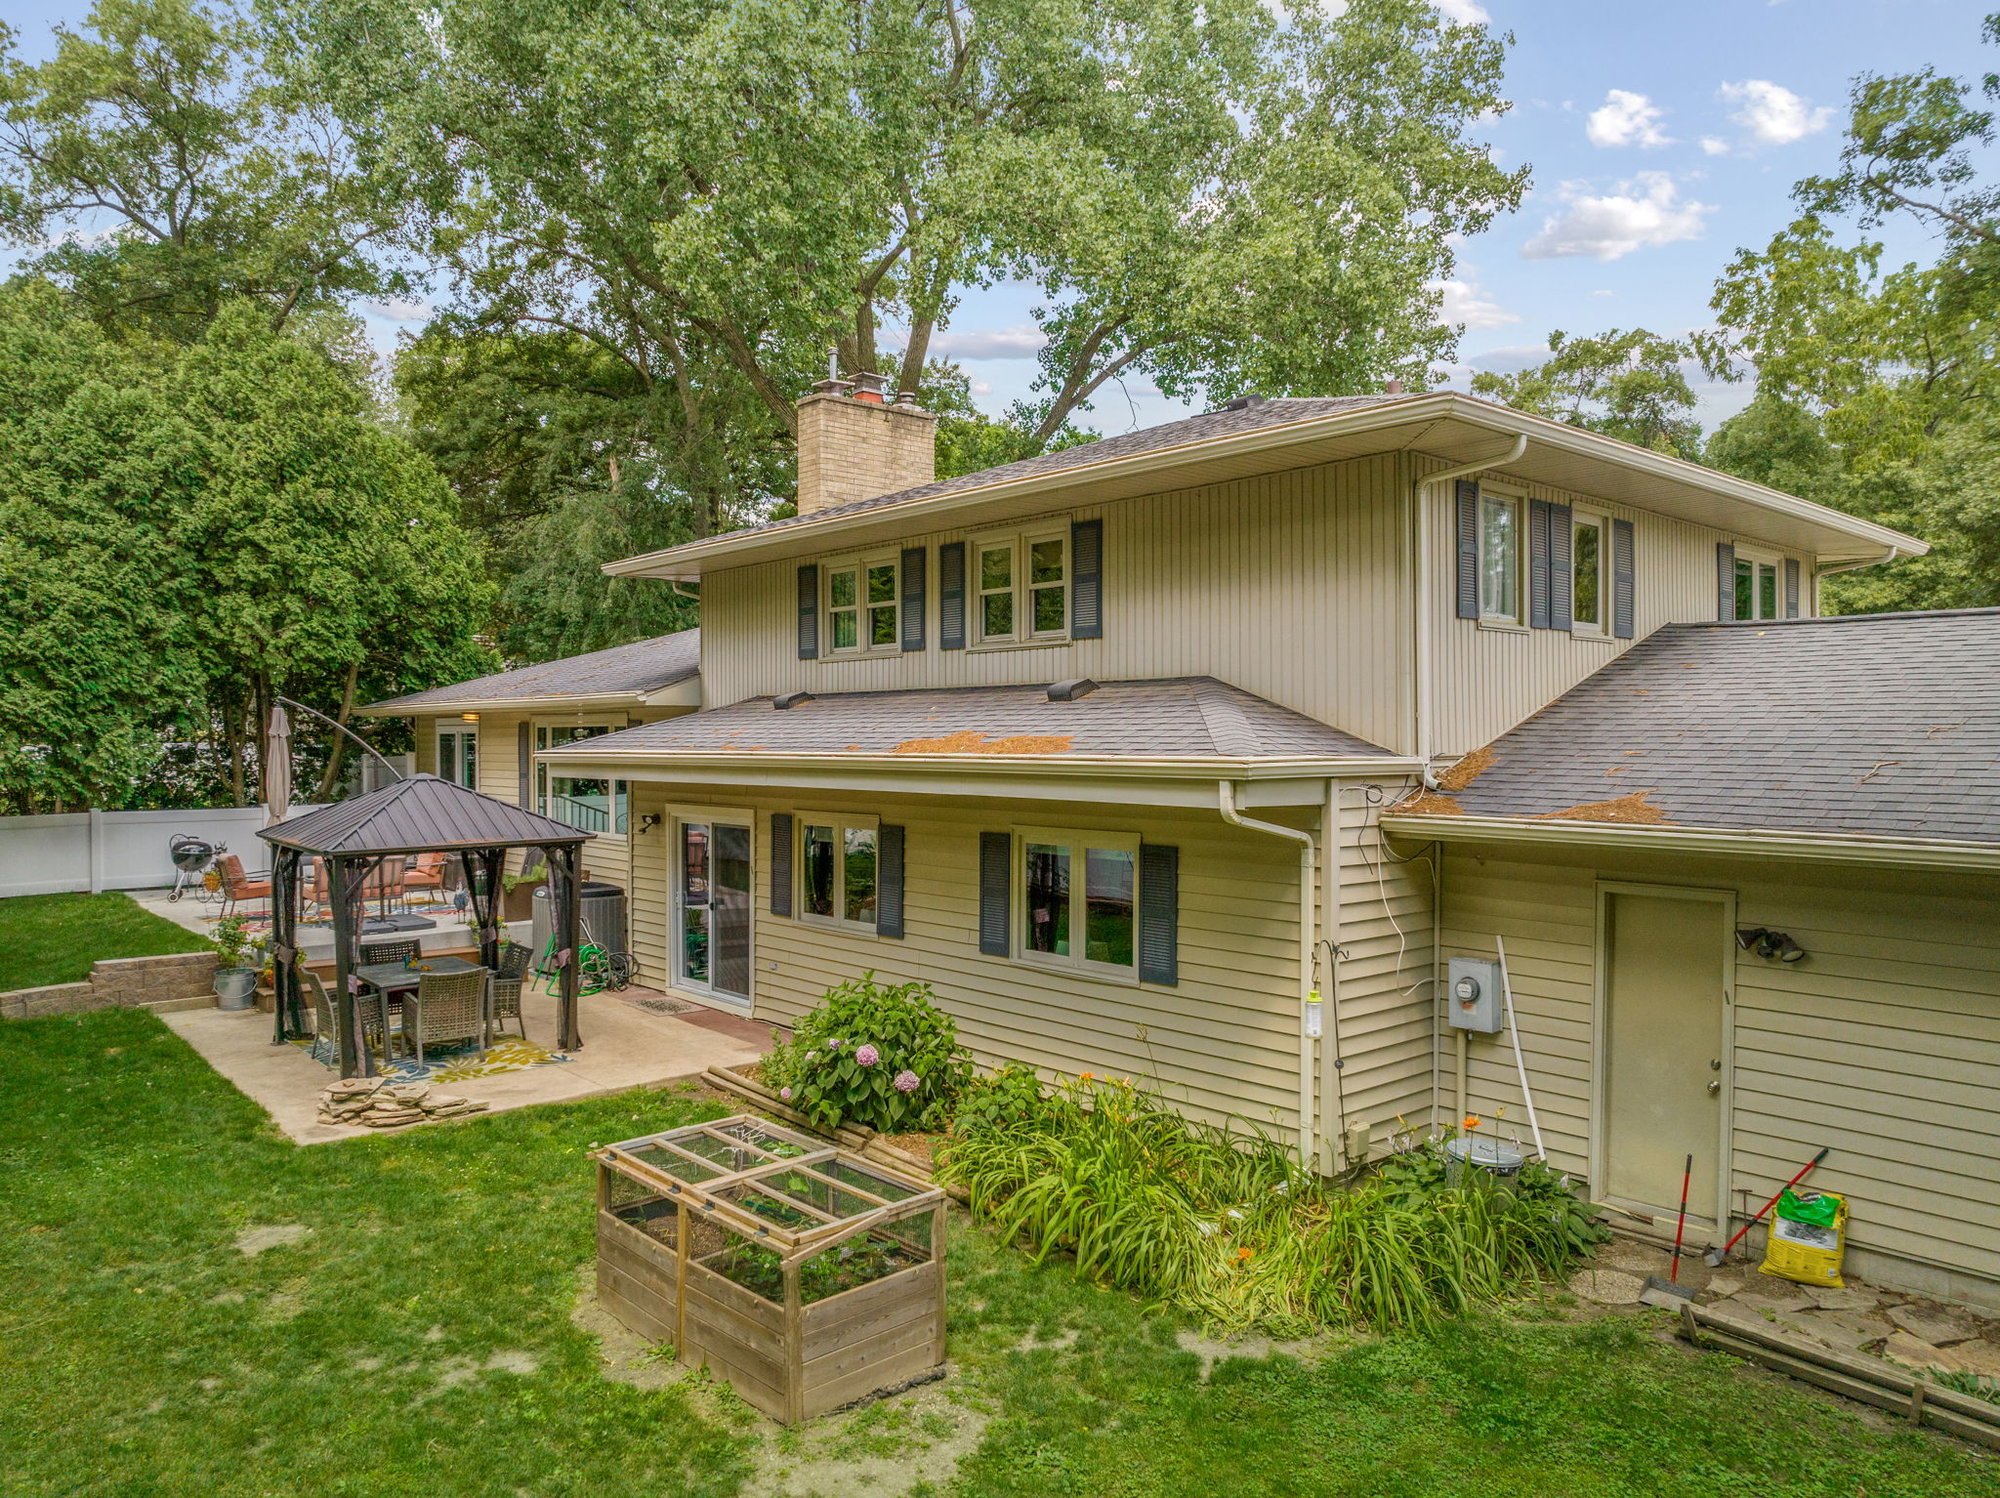 You Won't Want to Miss this Spacious Split Level Located in the Cedar Heights Neighborhood